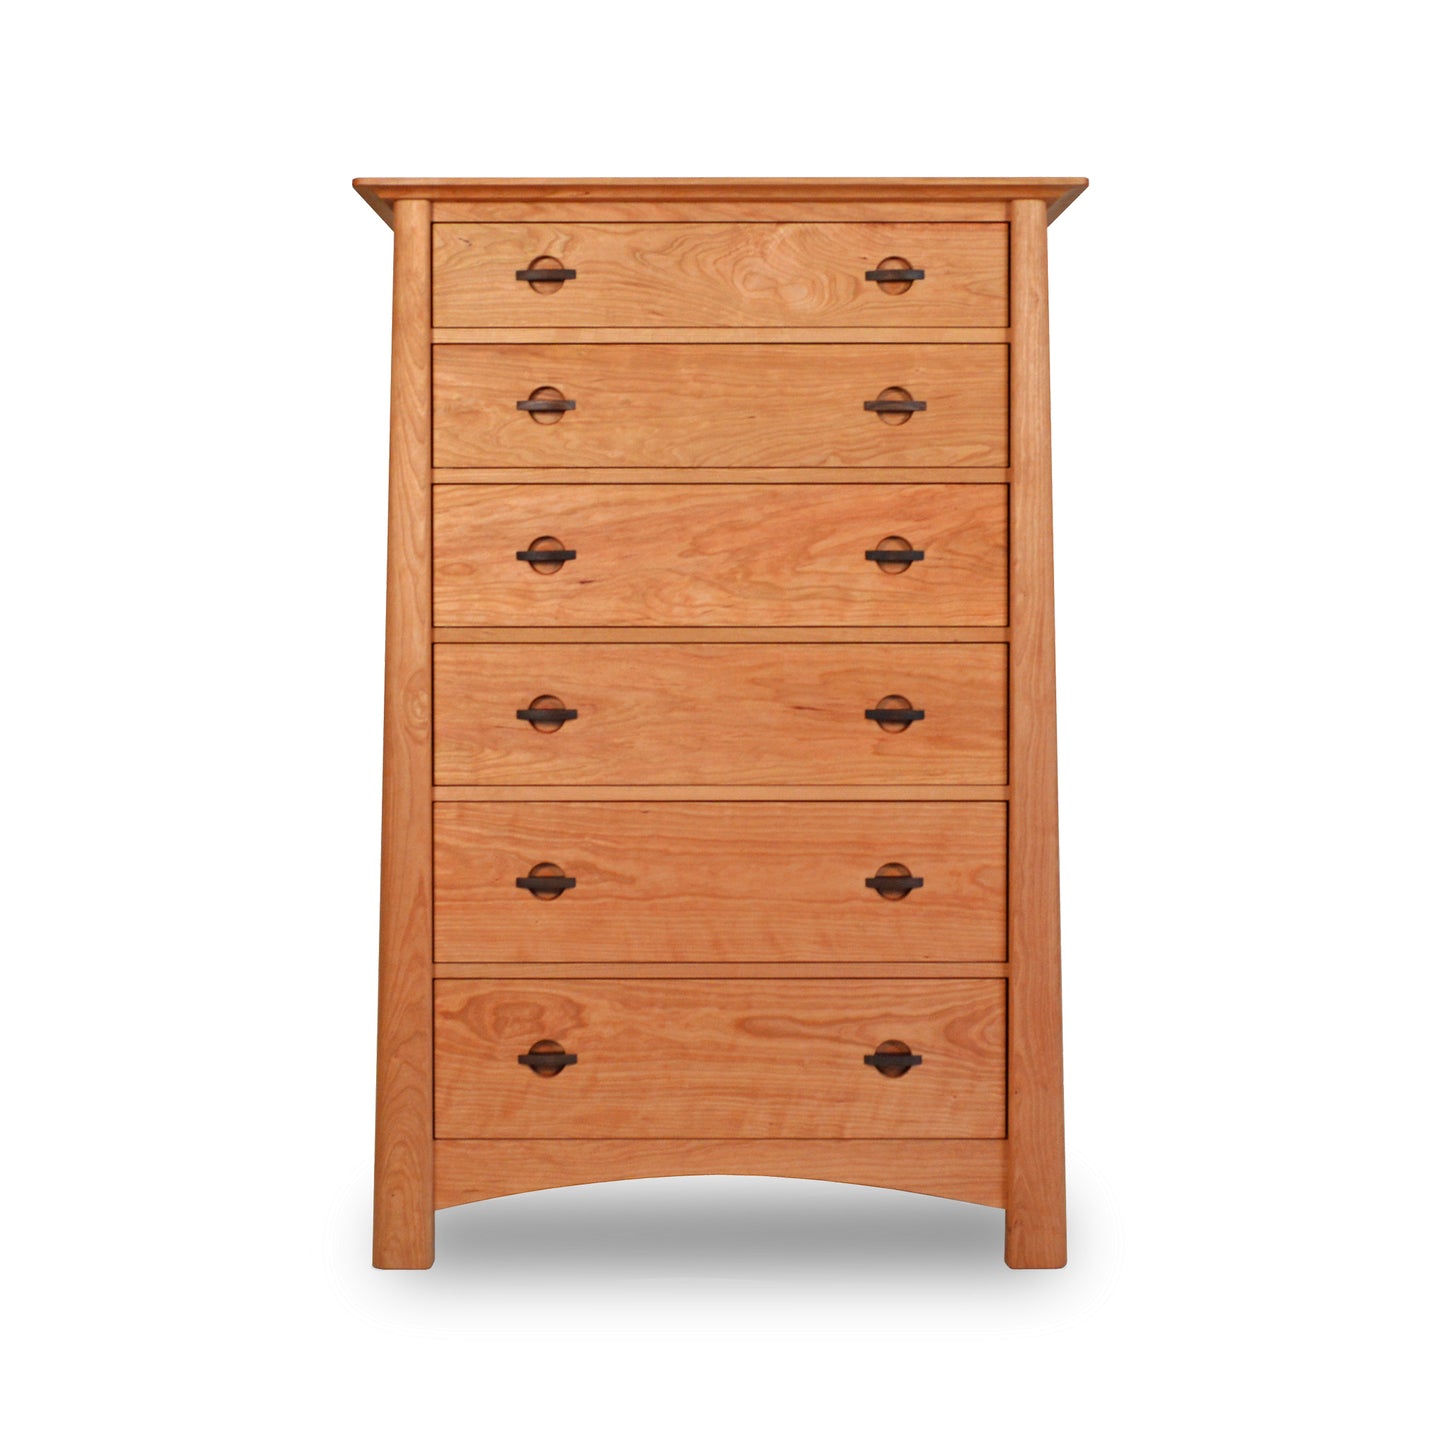 A tall Maple Corner Woodworks Cherry Moon 6-Drawer Chest with round handles, isolated on a white background.